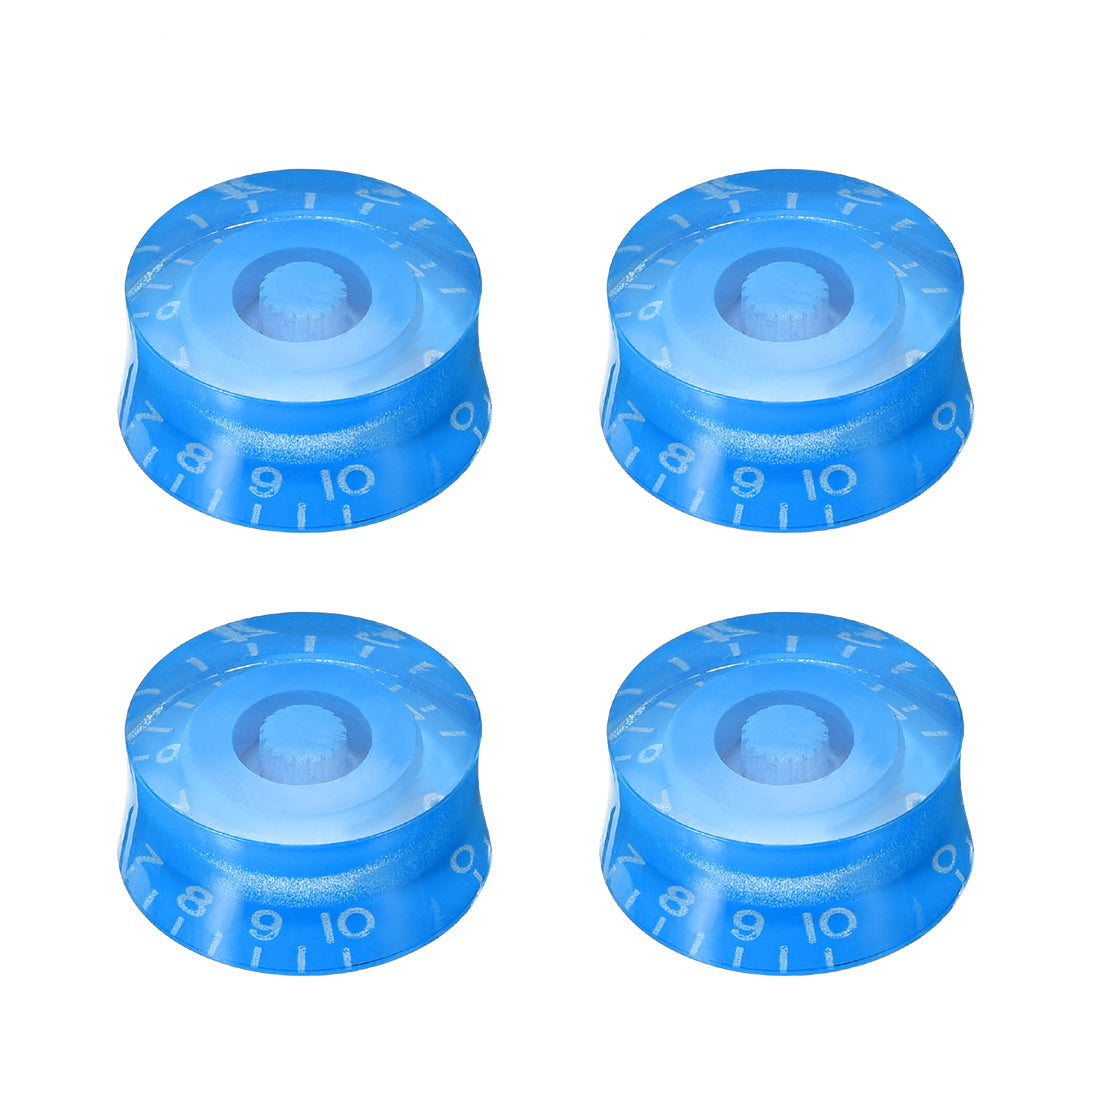 uxcell Uxcell 4pcs Blue 6mm Potentiometer Control Knobs For LP Electric Guitar Acrylic Volume Tone Knobs